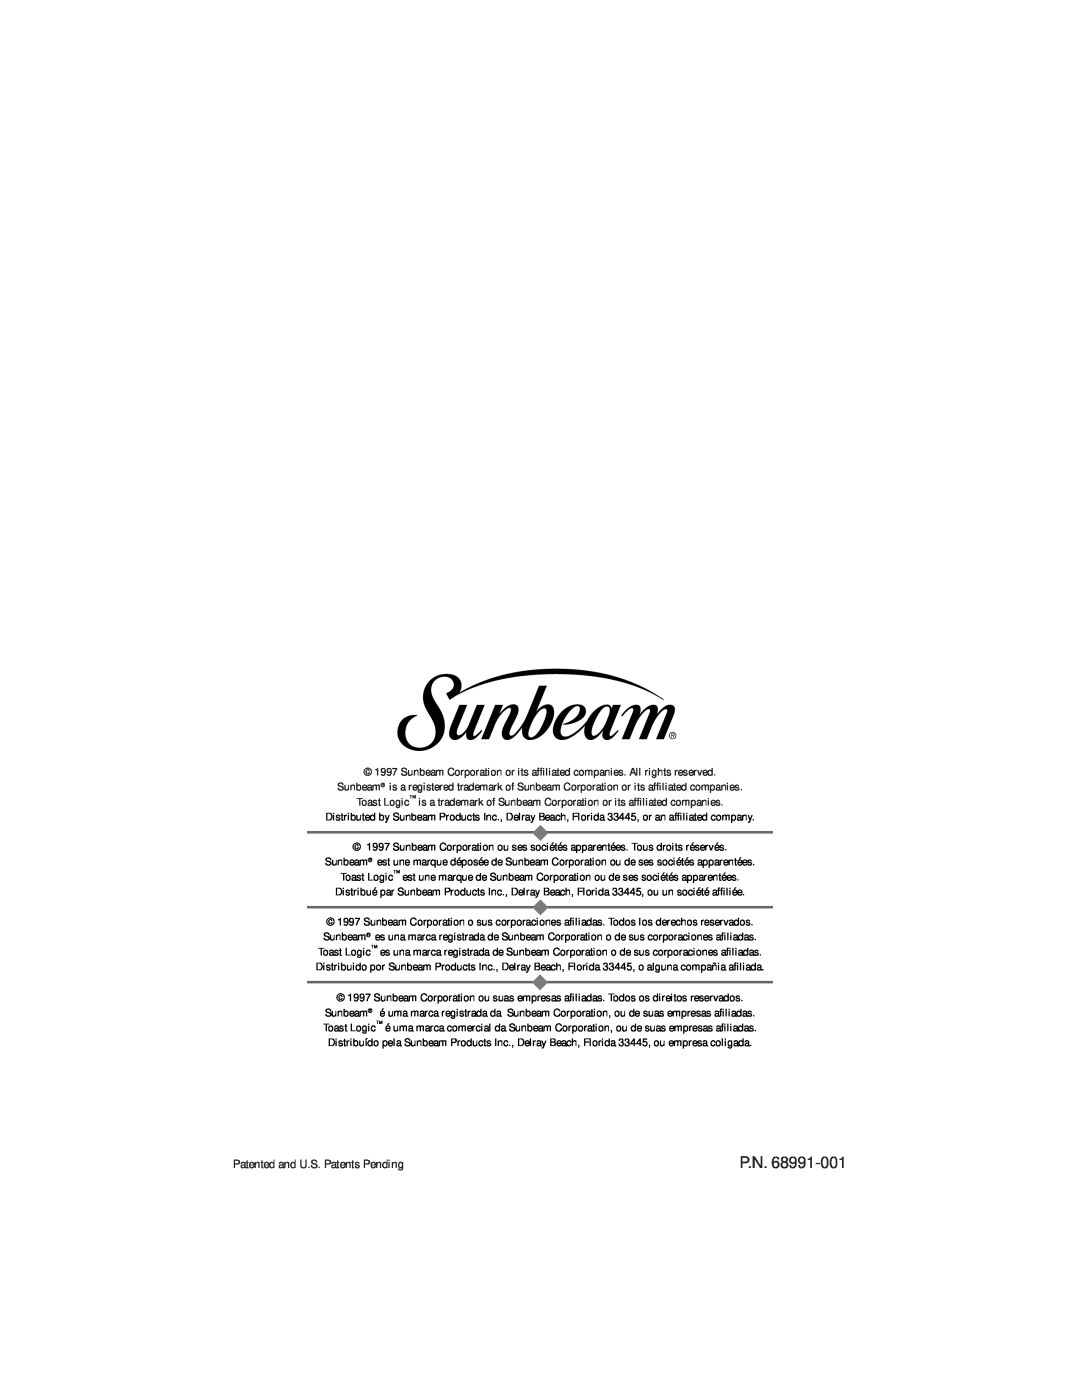 Sunbeam 3806 instruction manual Patented and U.S. Patents Pending 